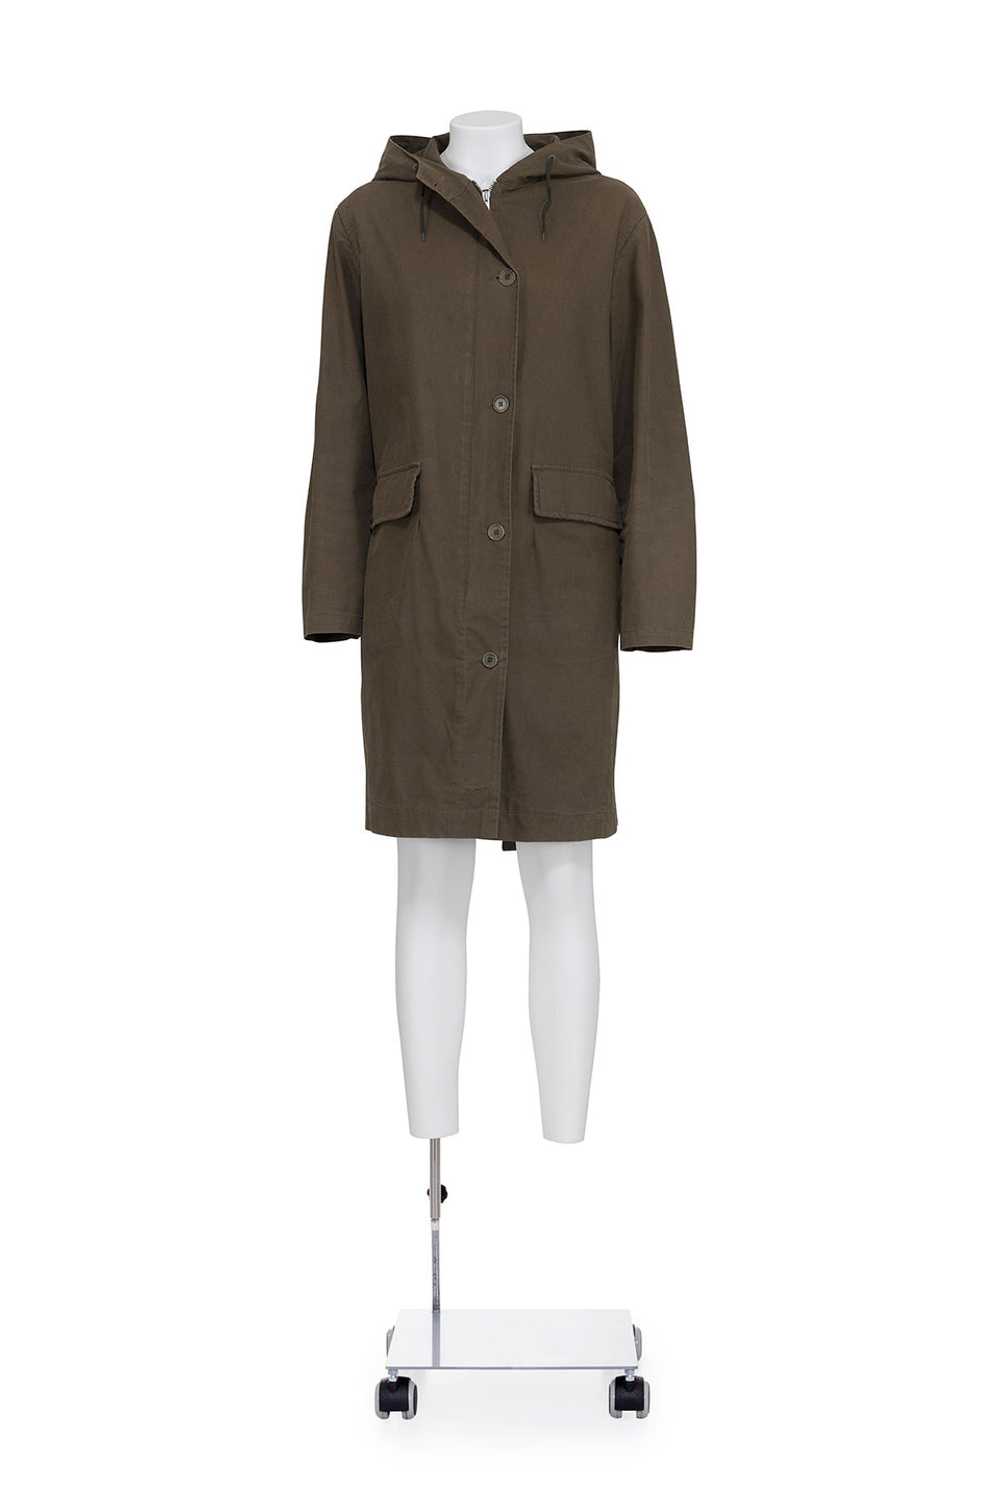 HELMUT LANG SS 99 ICONIC HOODED PARKA - image 1